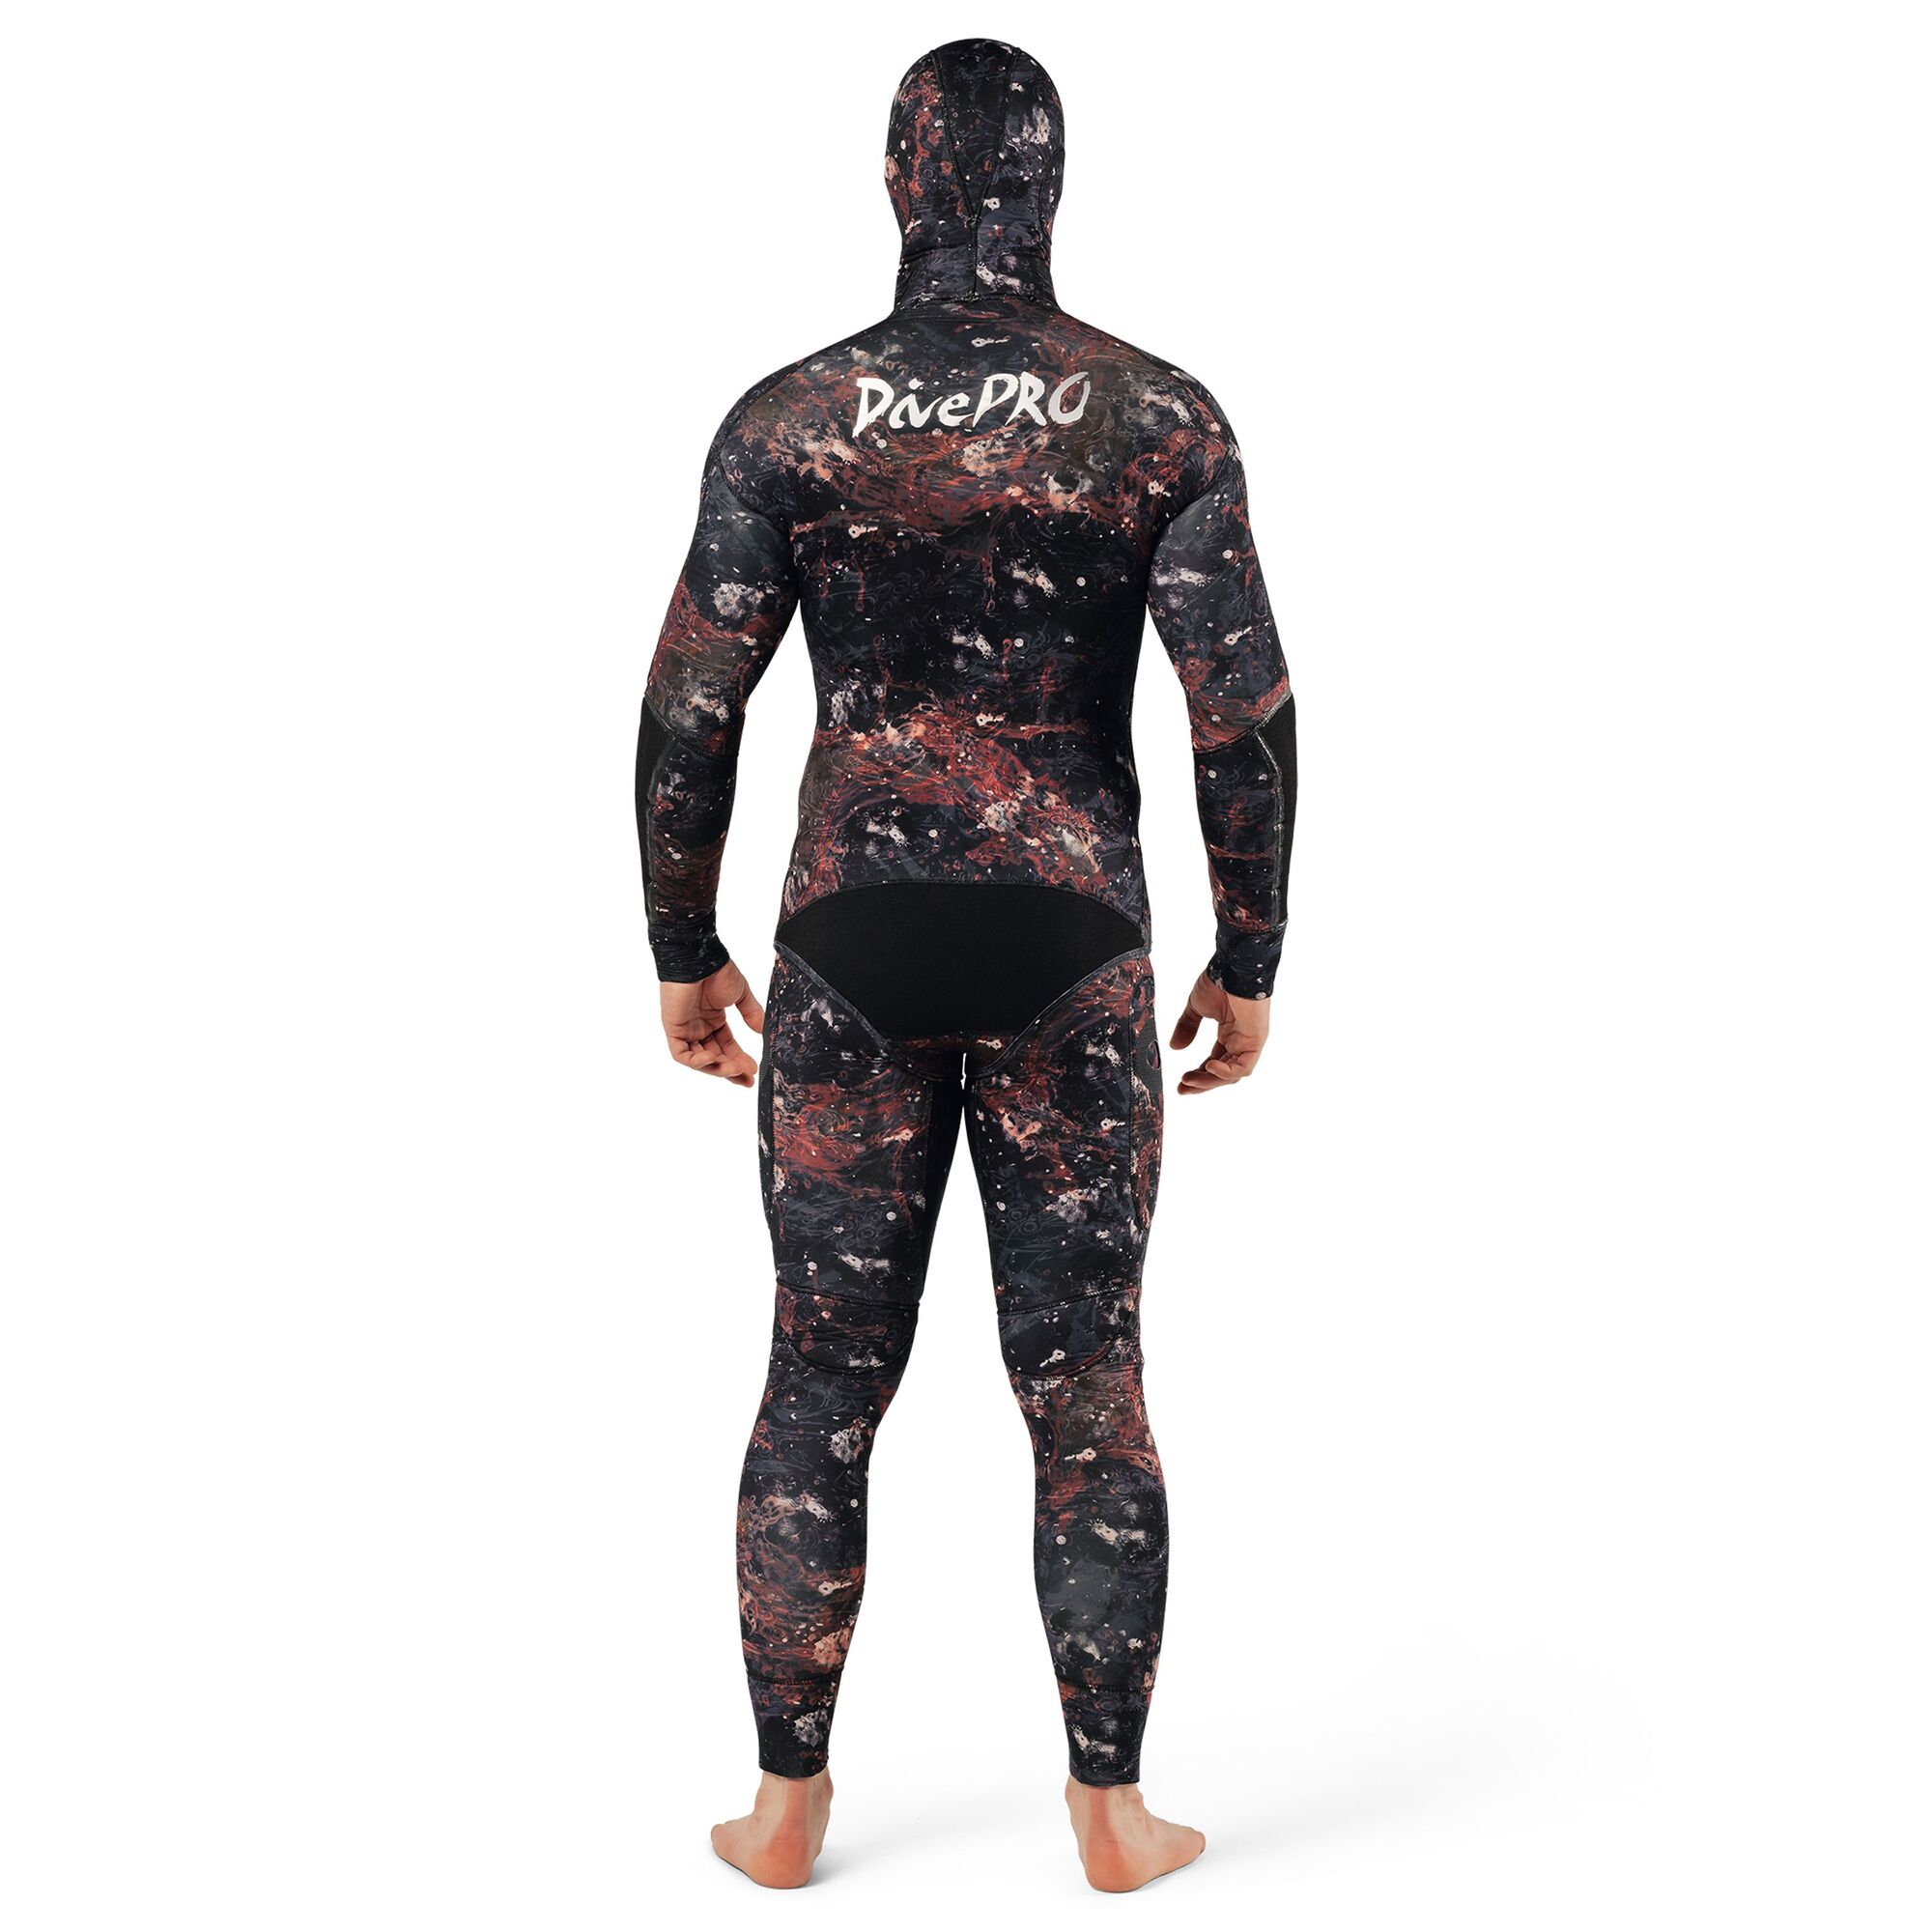 DivePRO Opencell Wetsuit DIABLO YAMAMOTO 39 5mm| The Mr Dive ...